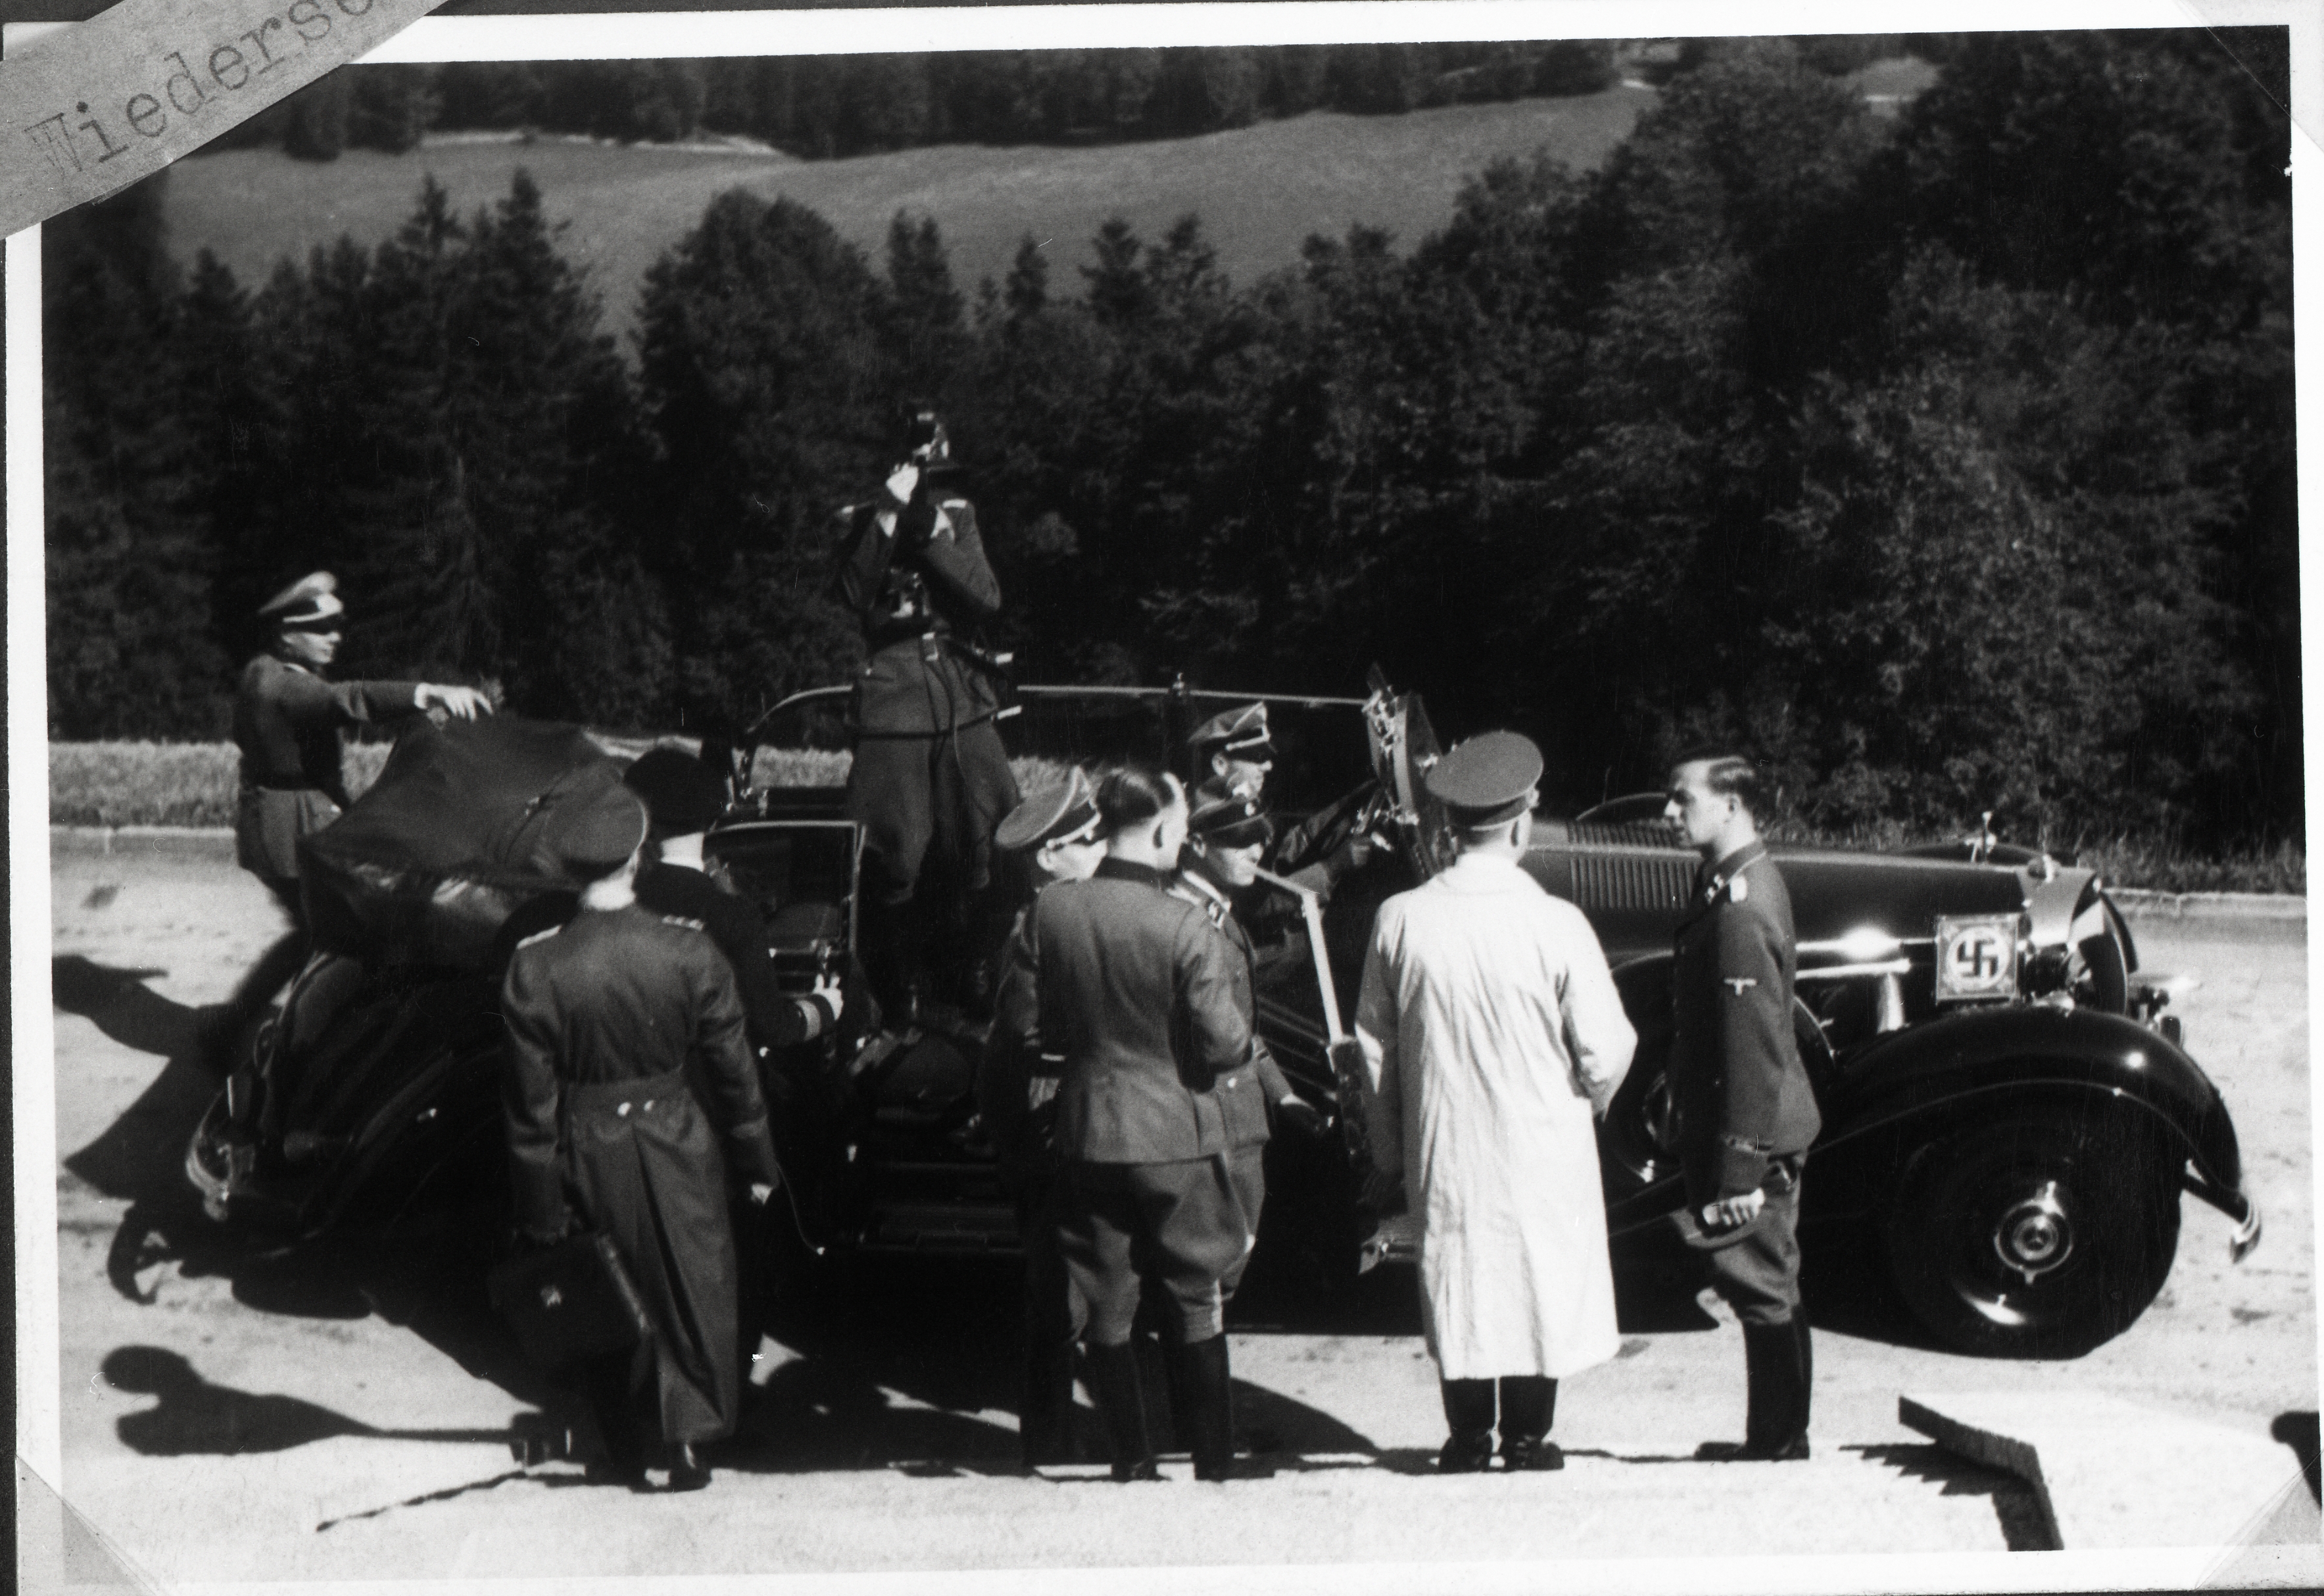 Adolf Hitler before his departure to Berlin, from Eva Braun's albums